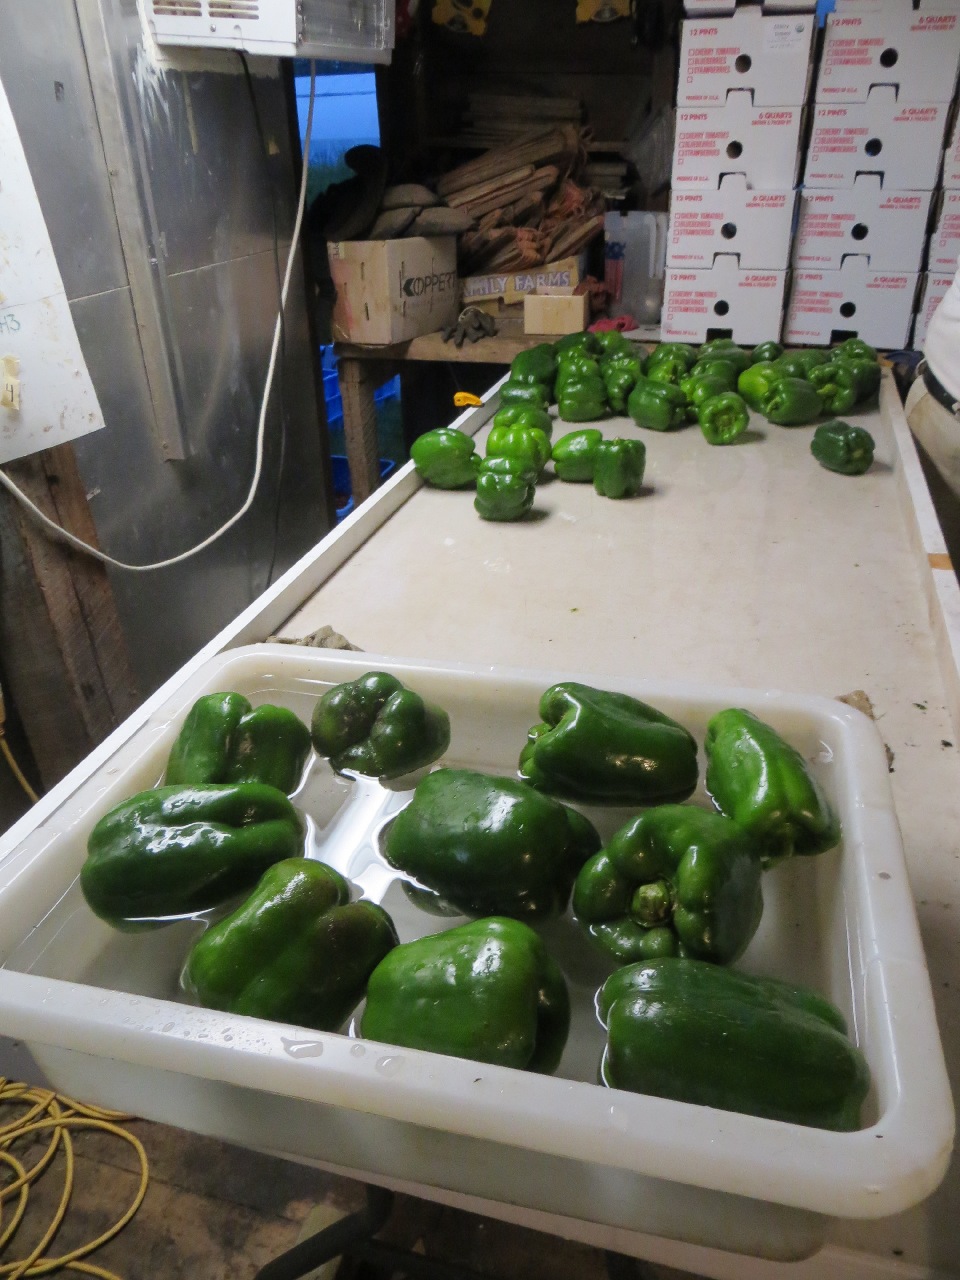 A table with a small tub of water on the near end, several peppers floating in it. On the far end of the table are clean peppers waiting to be packed into cases.